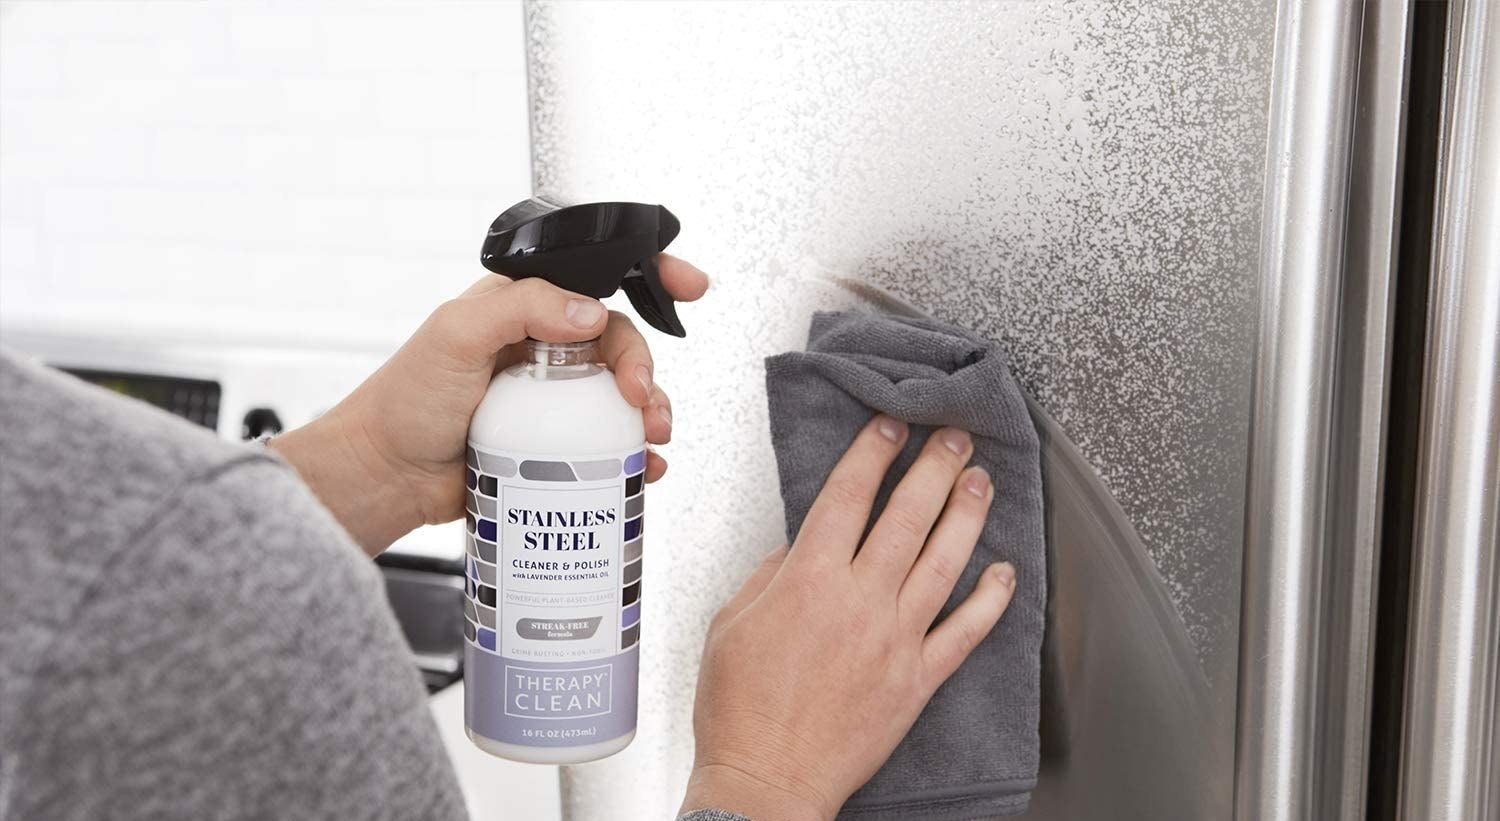 model spraying Therapy clean Stainless Steel cleaner on fridge, then wiping with cloth